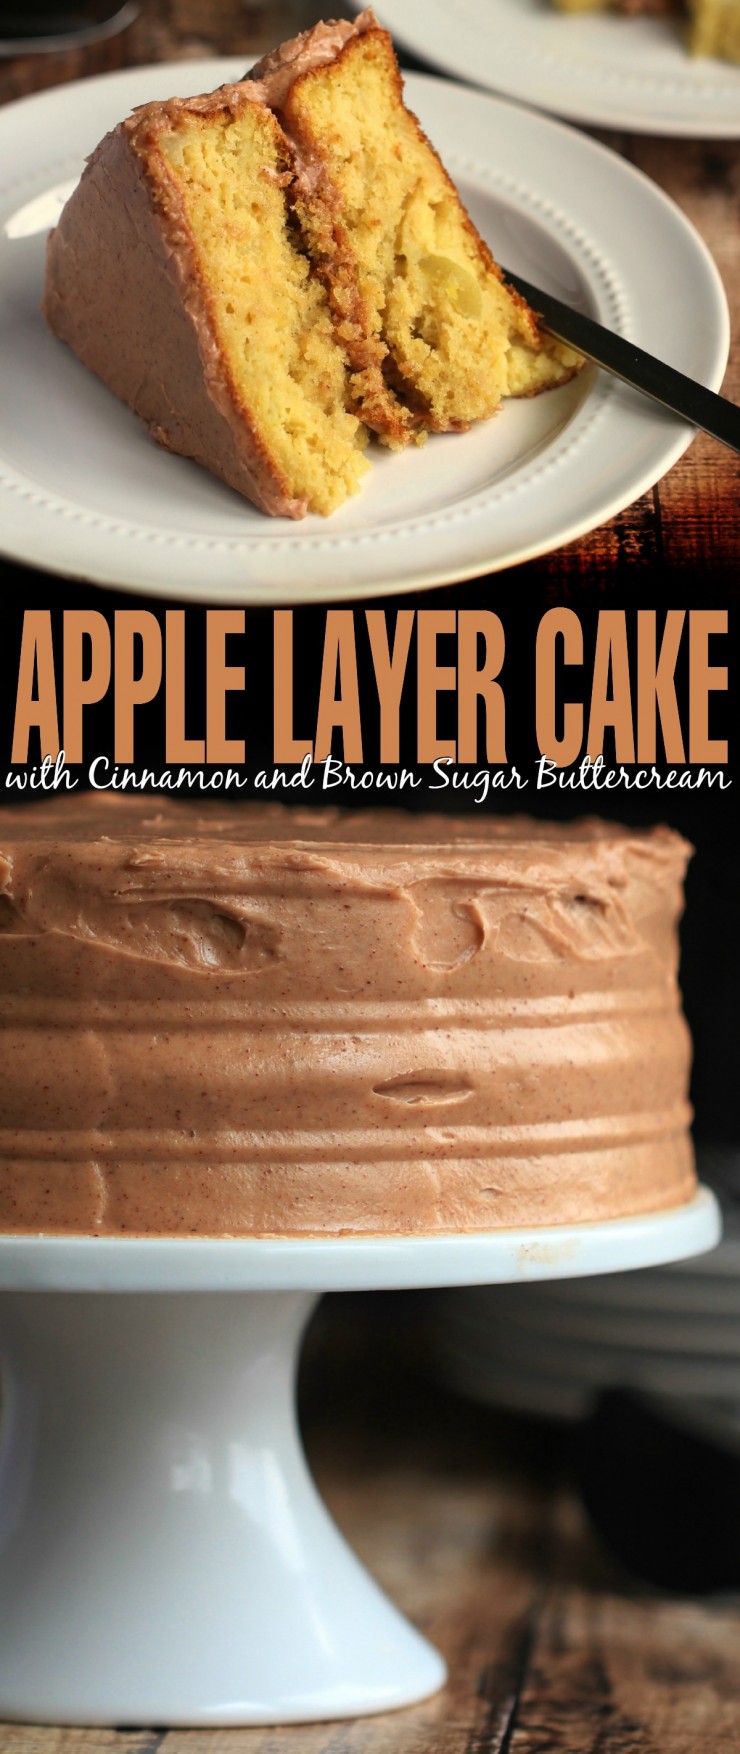 This Apple Layer Cake with Cinnamon and Brown Sugar Buttercream recipe makes a deliciously sweet and spiced dessert.